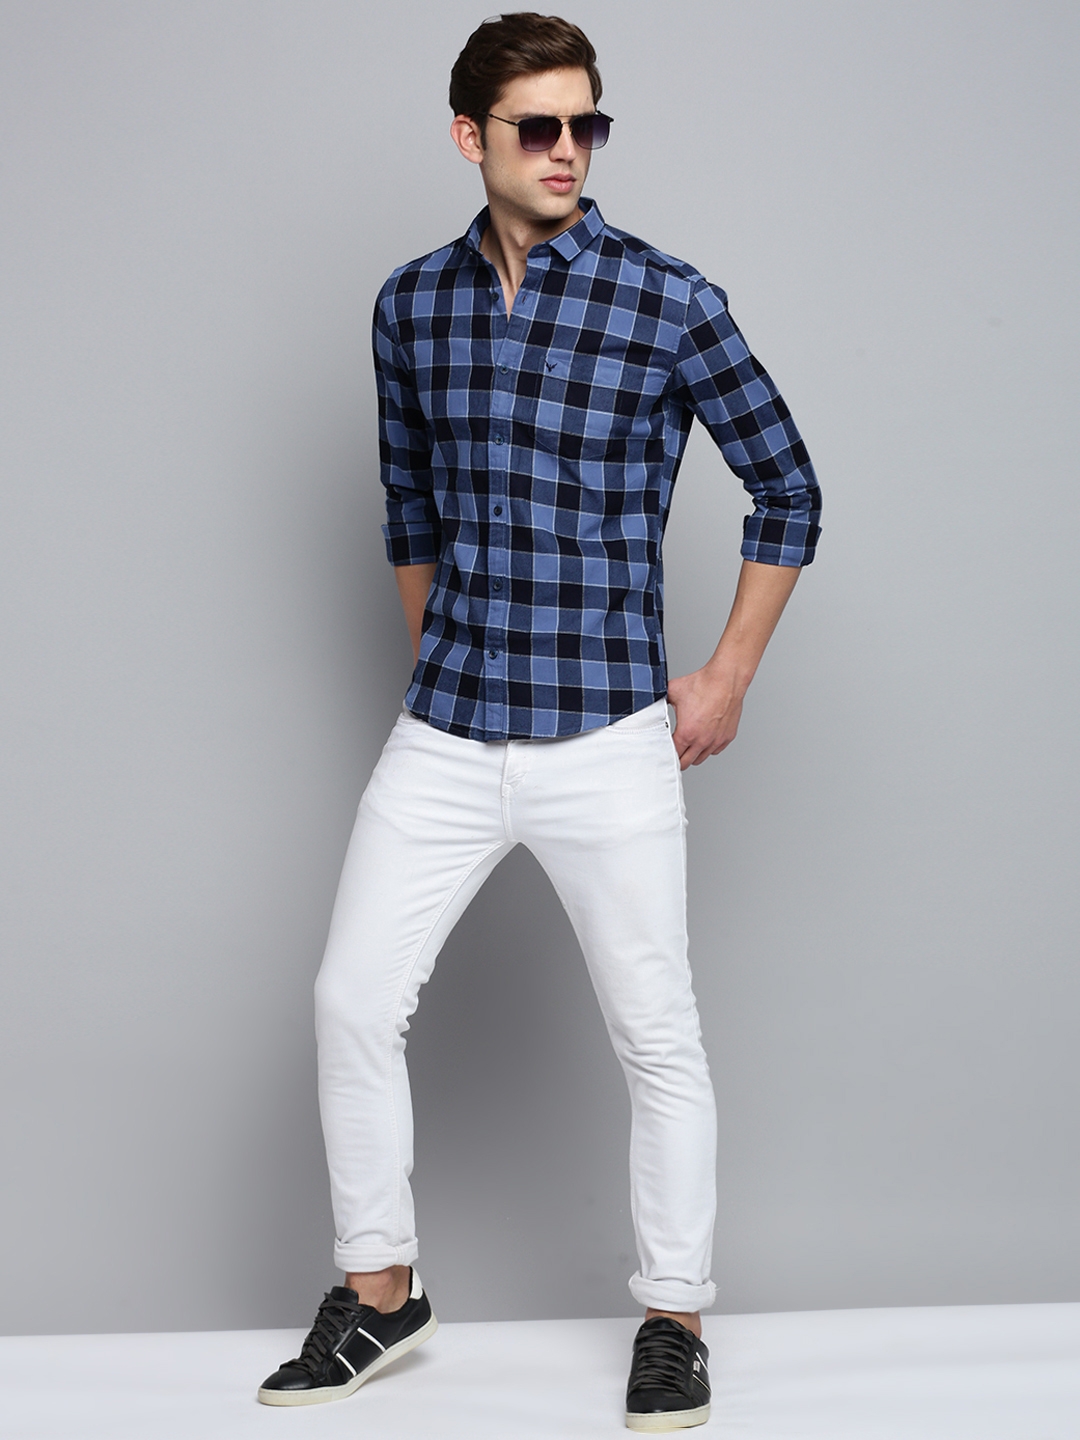 Showoff | SHOWOFF Men's Spread Collar Checked Blue Classic Shirt 4